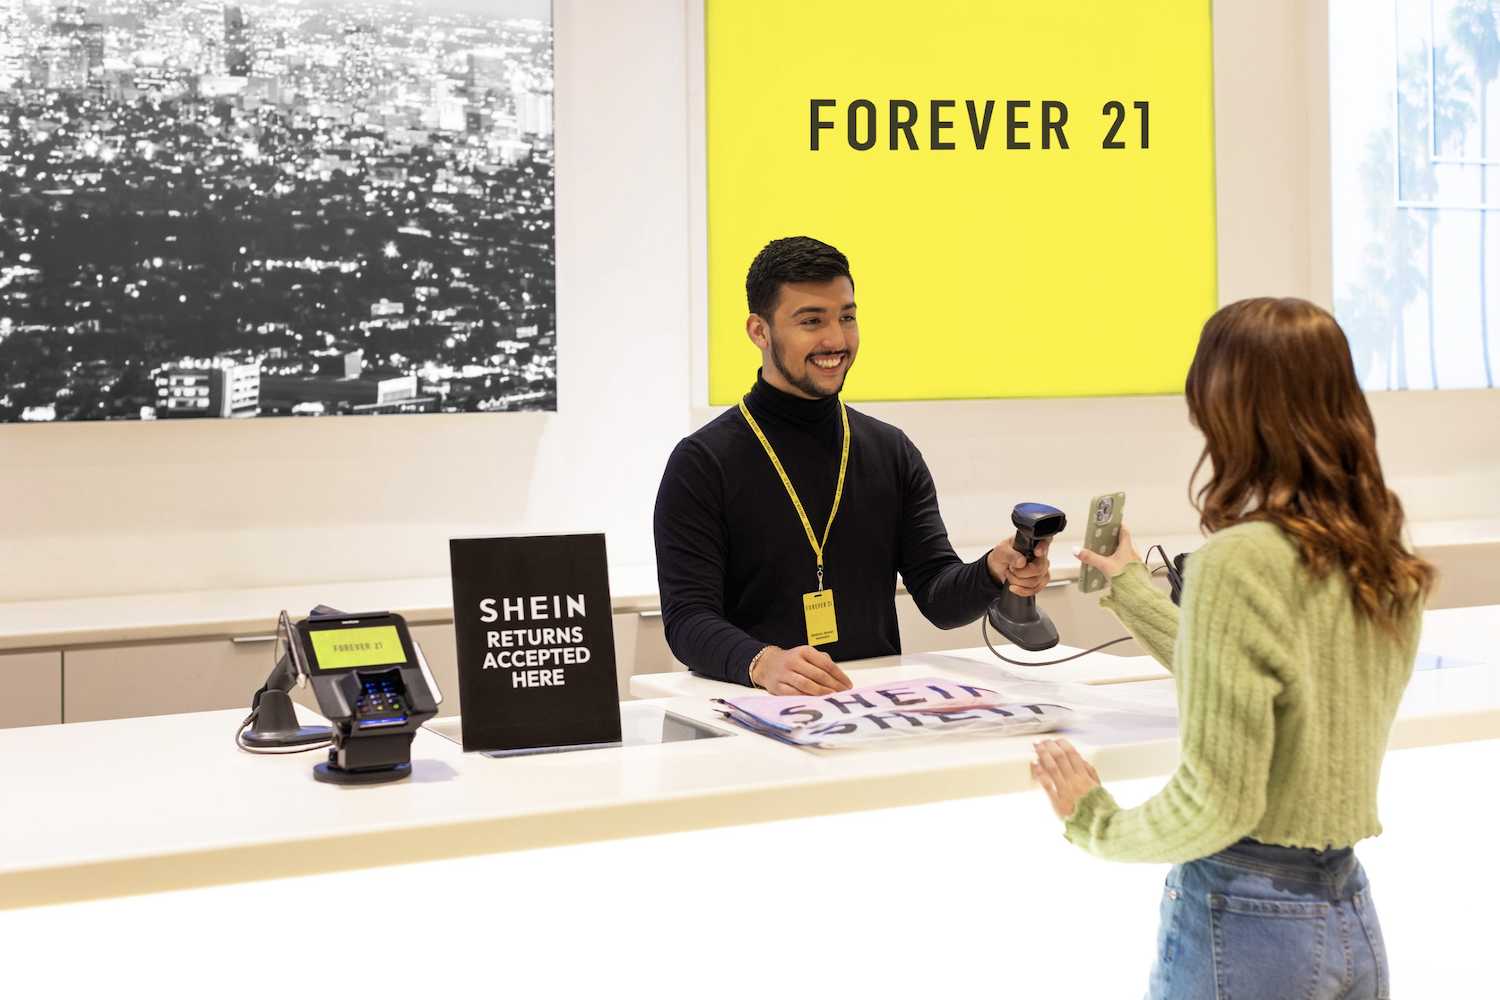 Happy Returns Lets Shein Shoppers Return Purchases in Forever 21 Stores